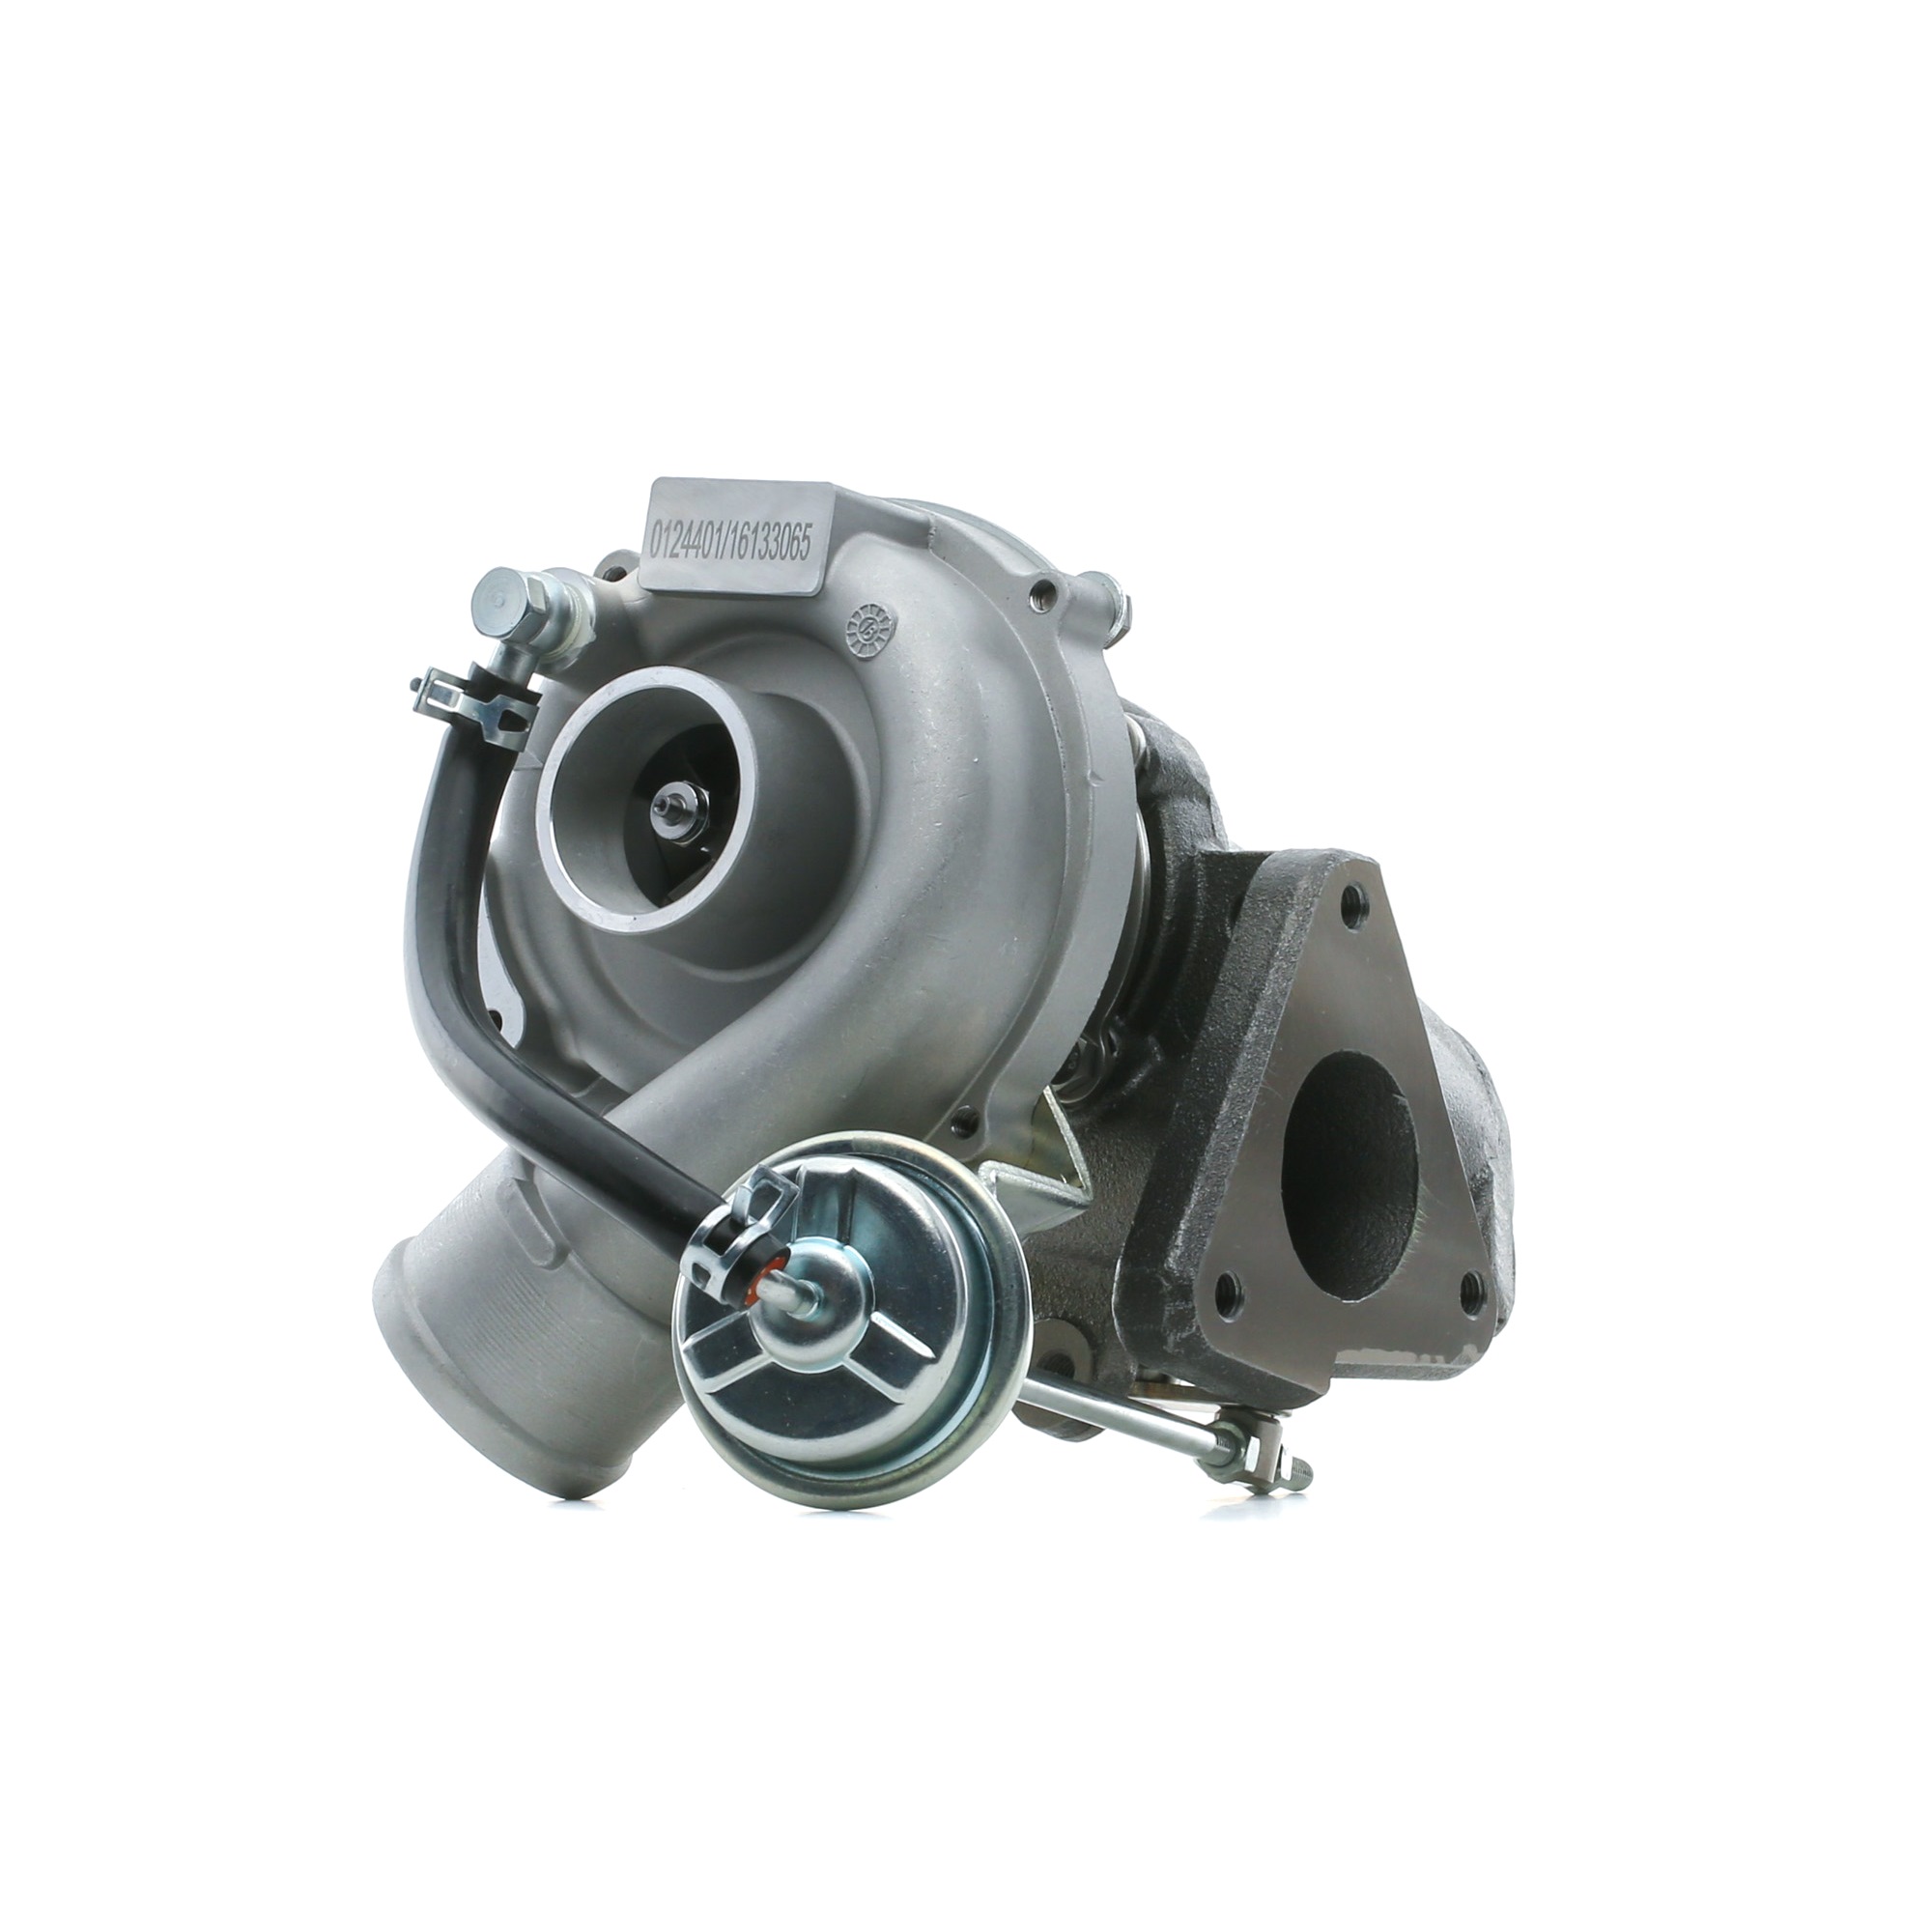 STARK SKCT-1190666 Turbocharger Exhaust Turbocharger, Vacuum-controlled, with gaskets/seals